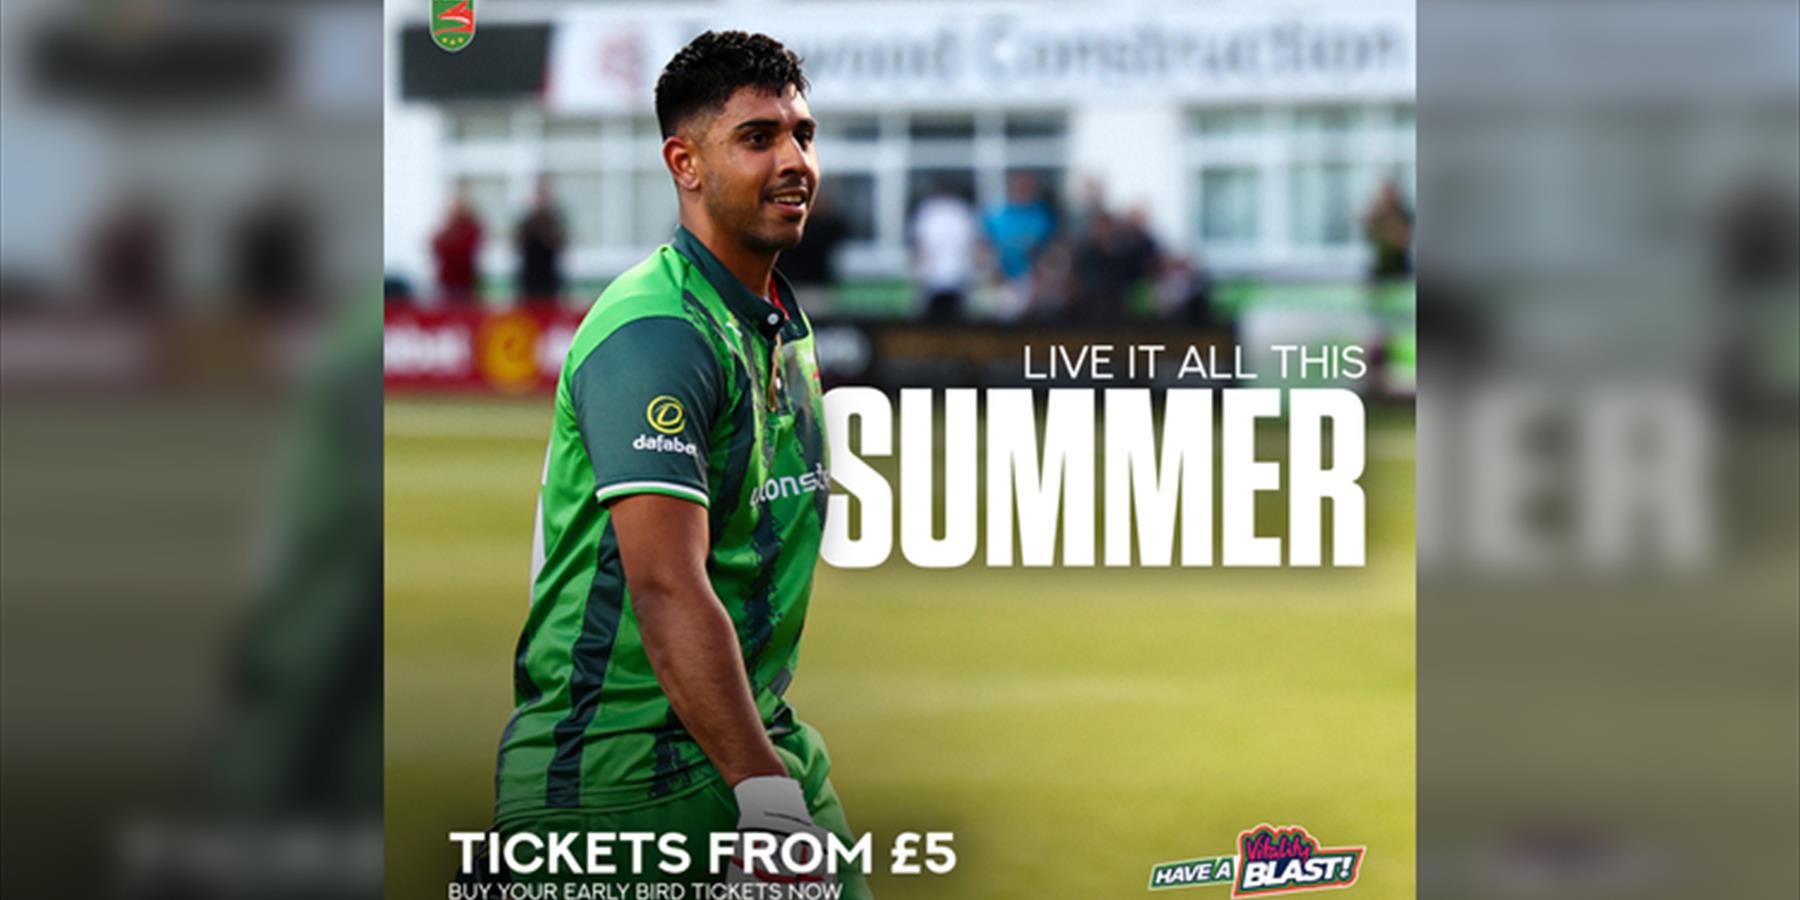 Leicestershire Foxes vs Yorkshire Vikings T20 Cricket